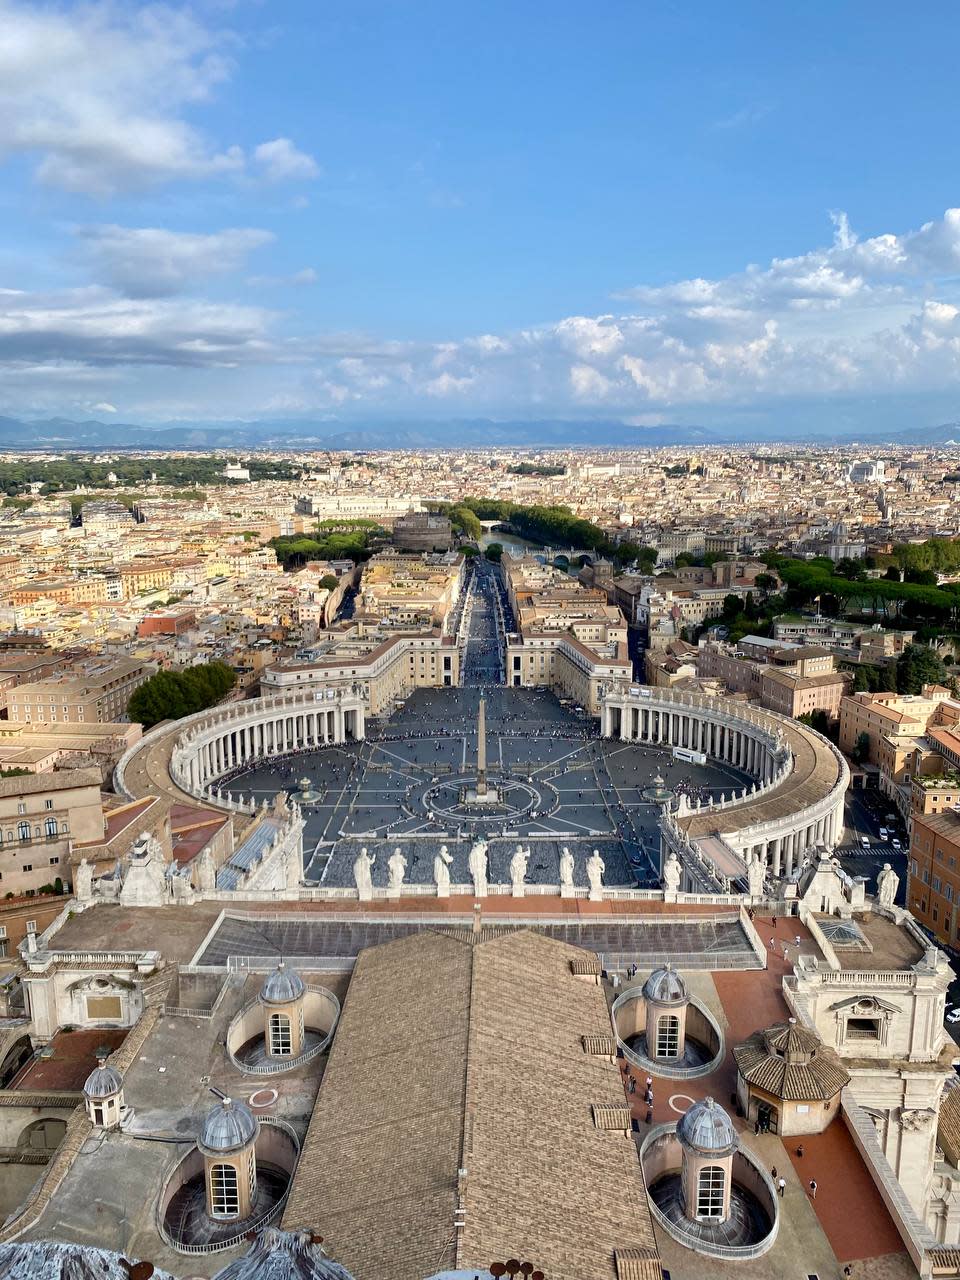 <title>The view from St. Peter's Basilica, Vatican | Eugene R.</title>